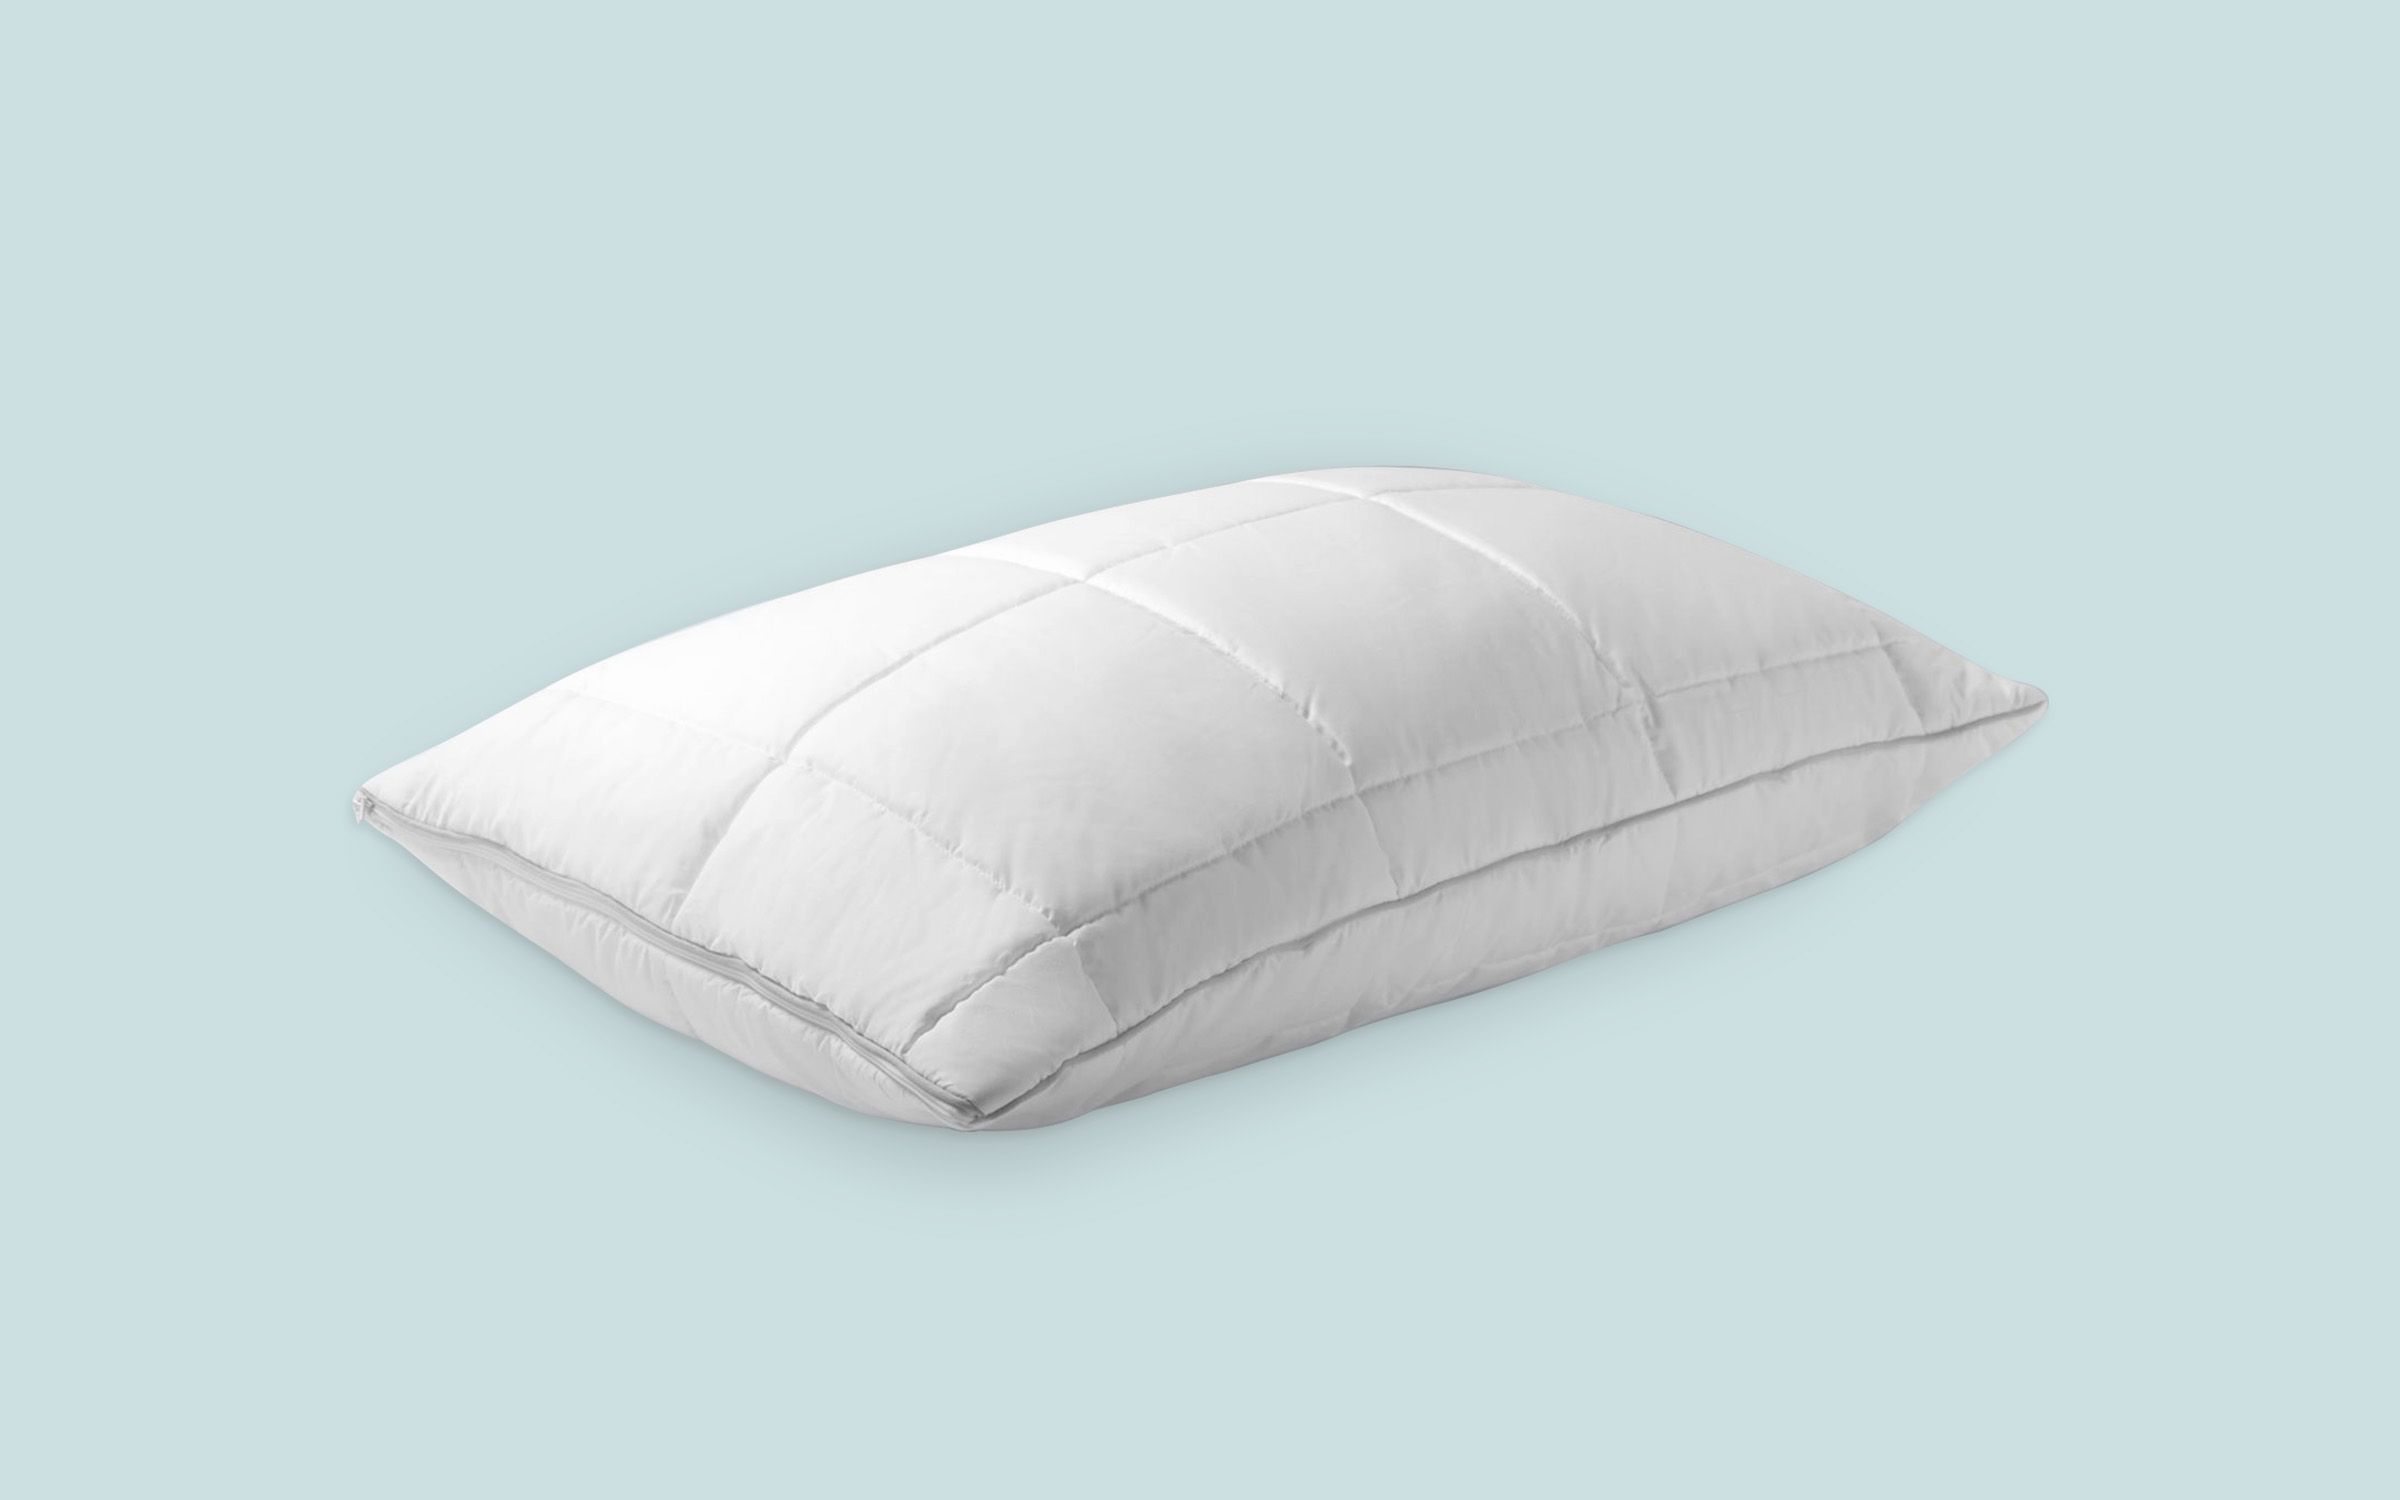 On trial: John Lewis Specialist Support Pillow